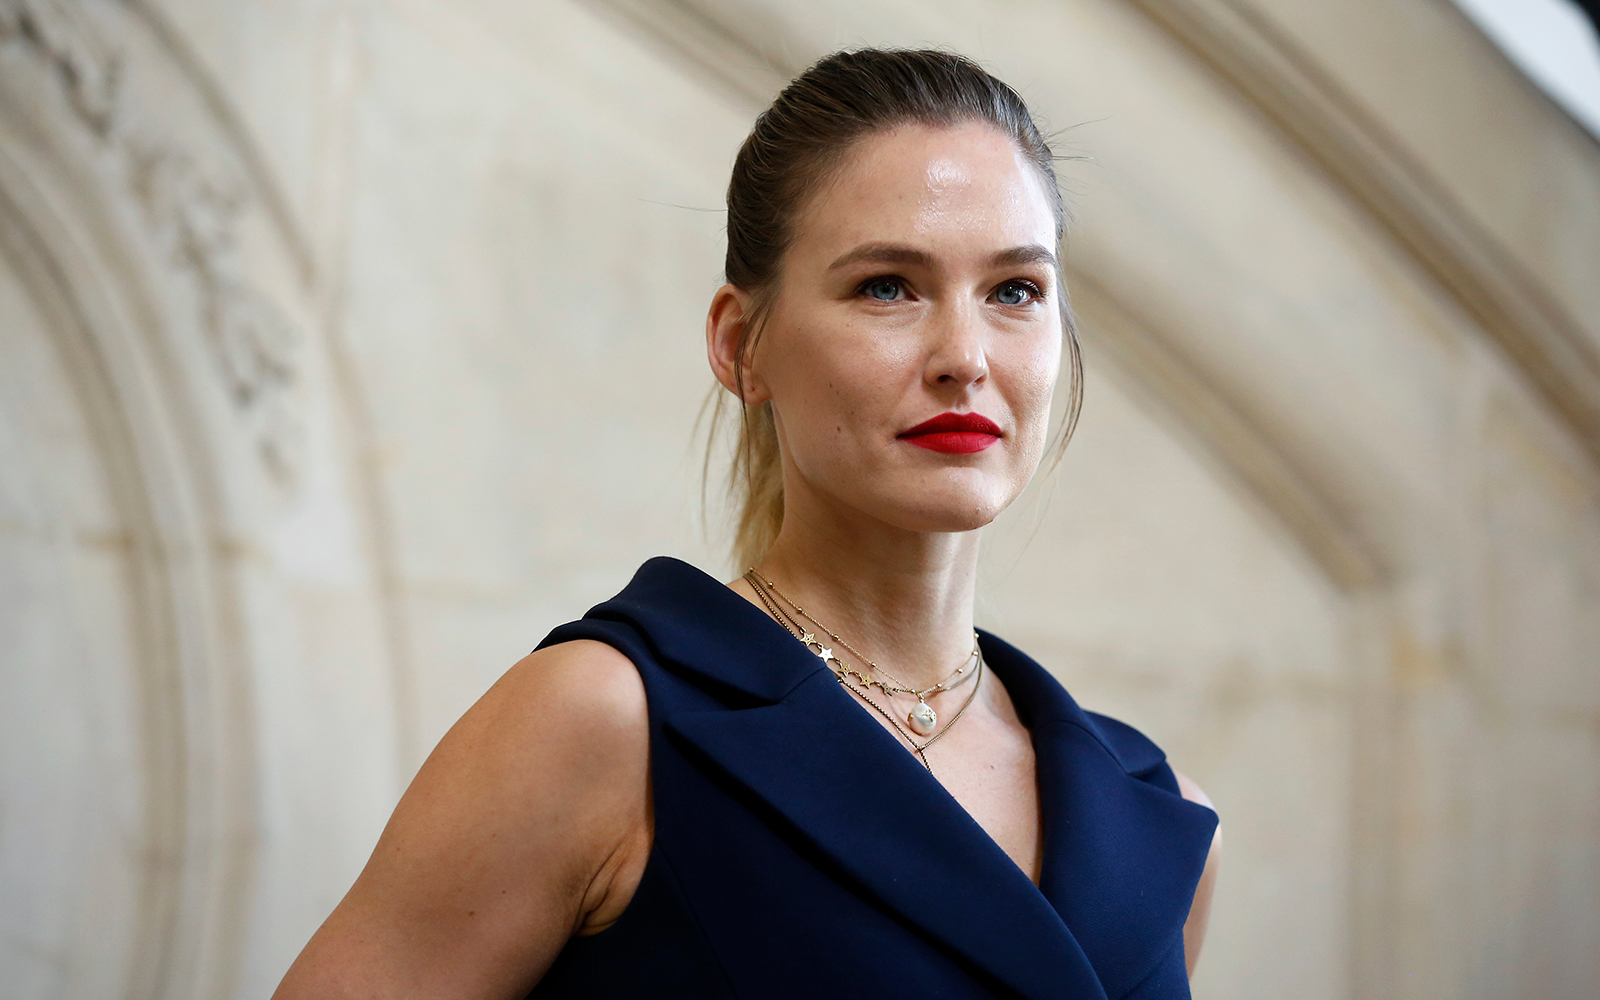 Man arrested for breaking into Bar Refaeli's family home, demanding to ...